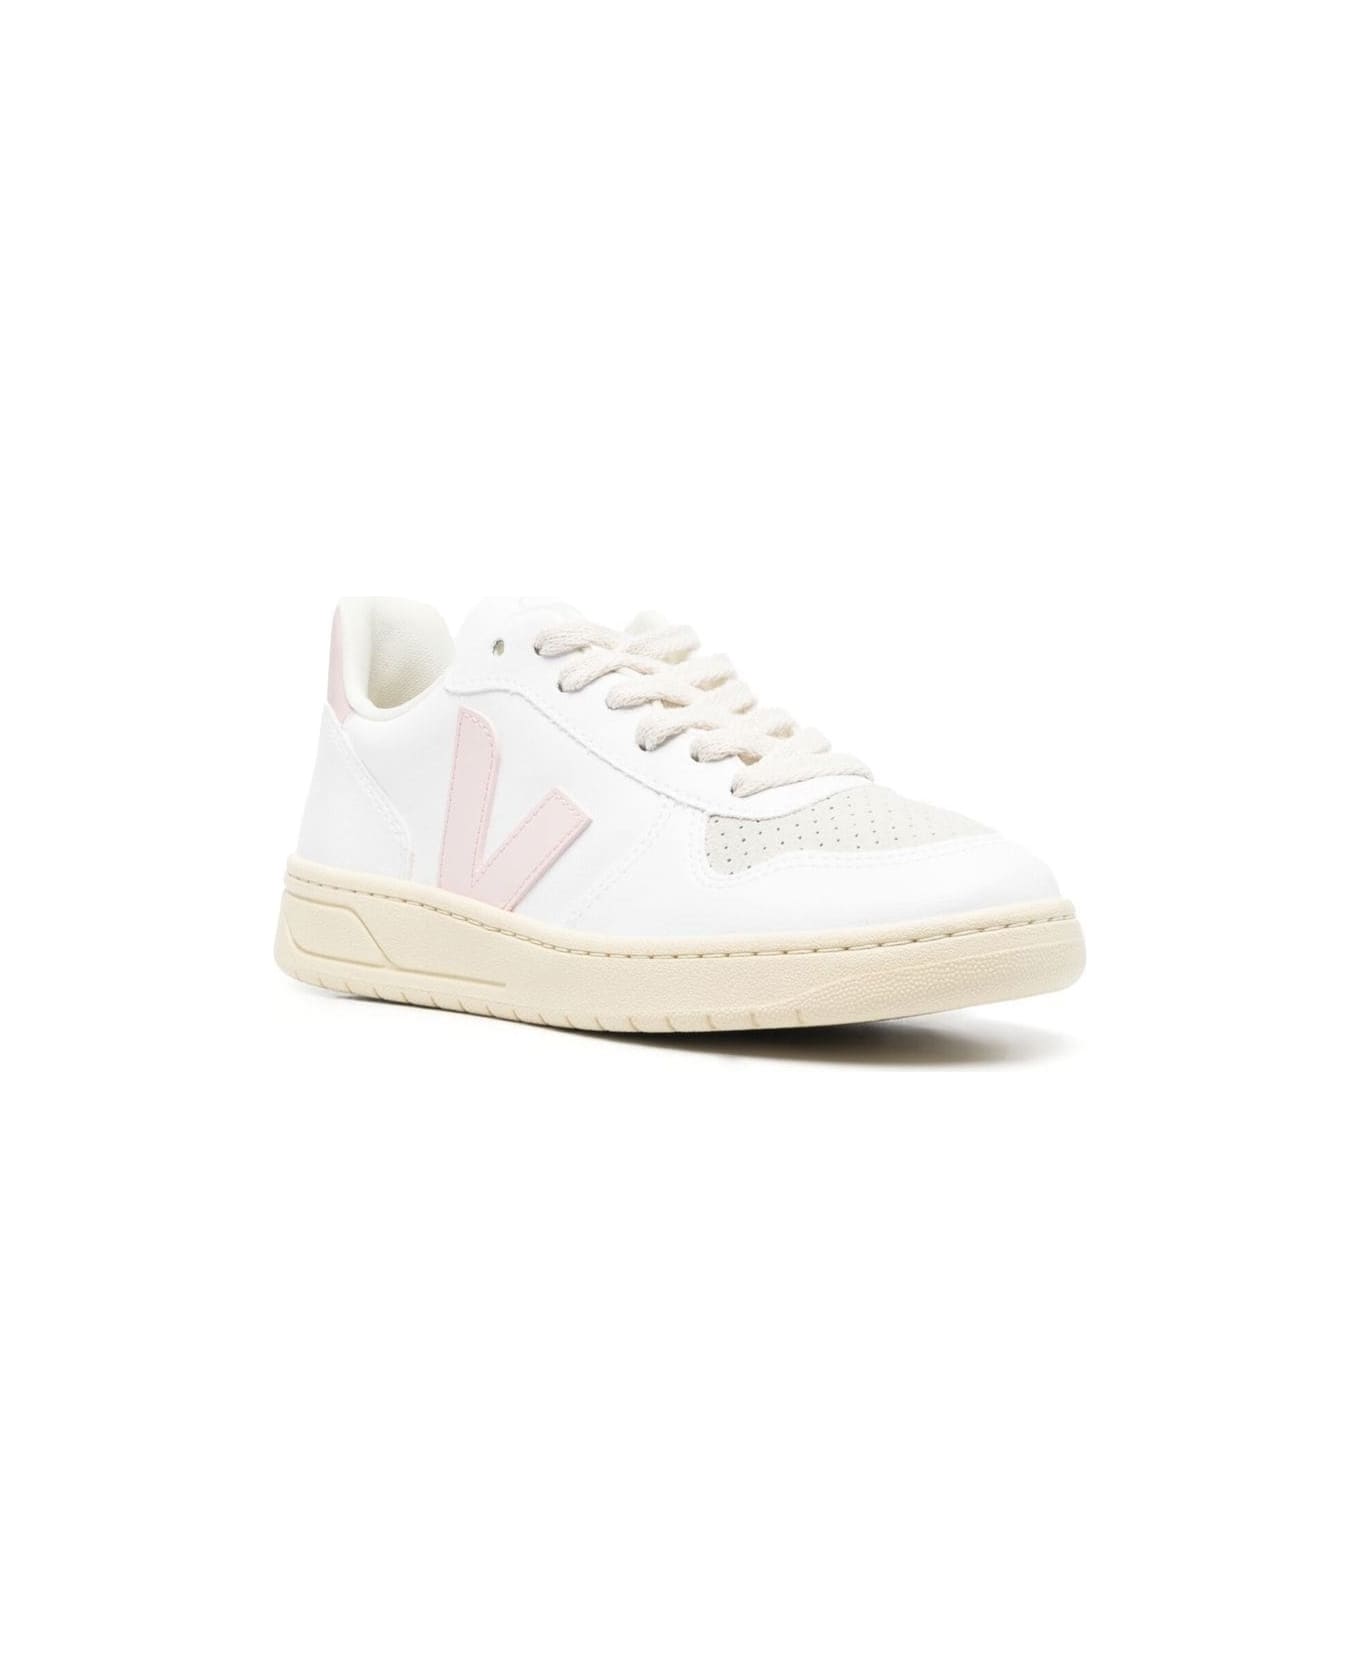 Veja Sneakers V-10 With Logo In White And Pink Leather Woman - White スニーカー